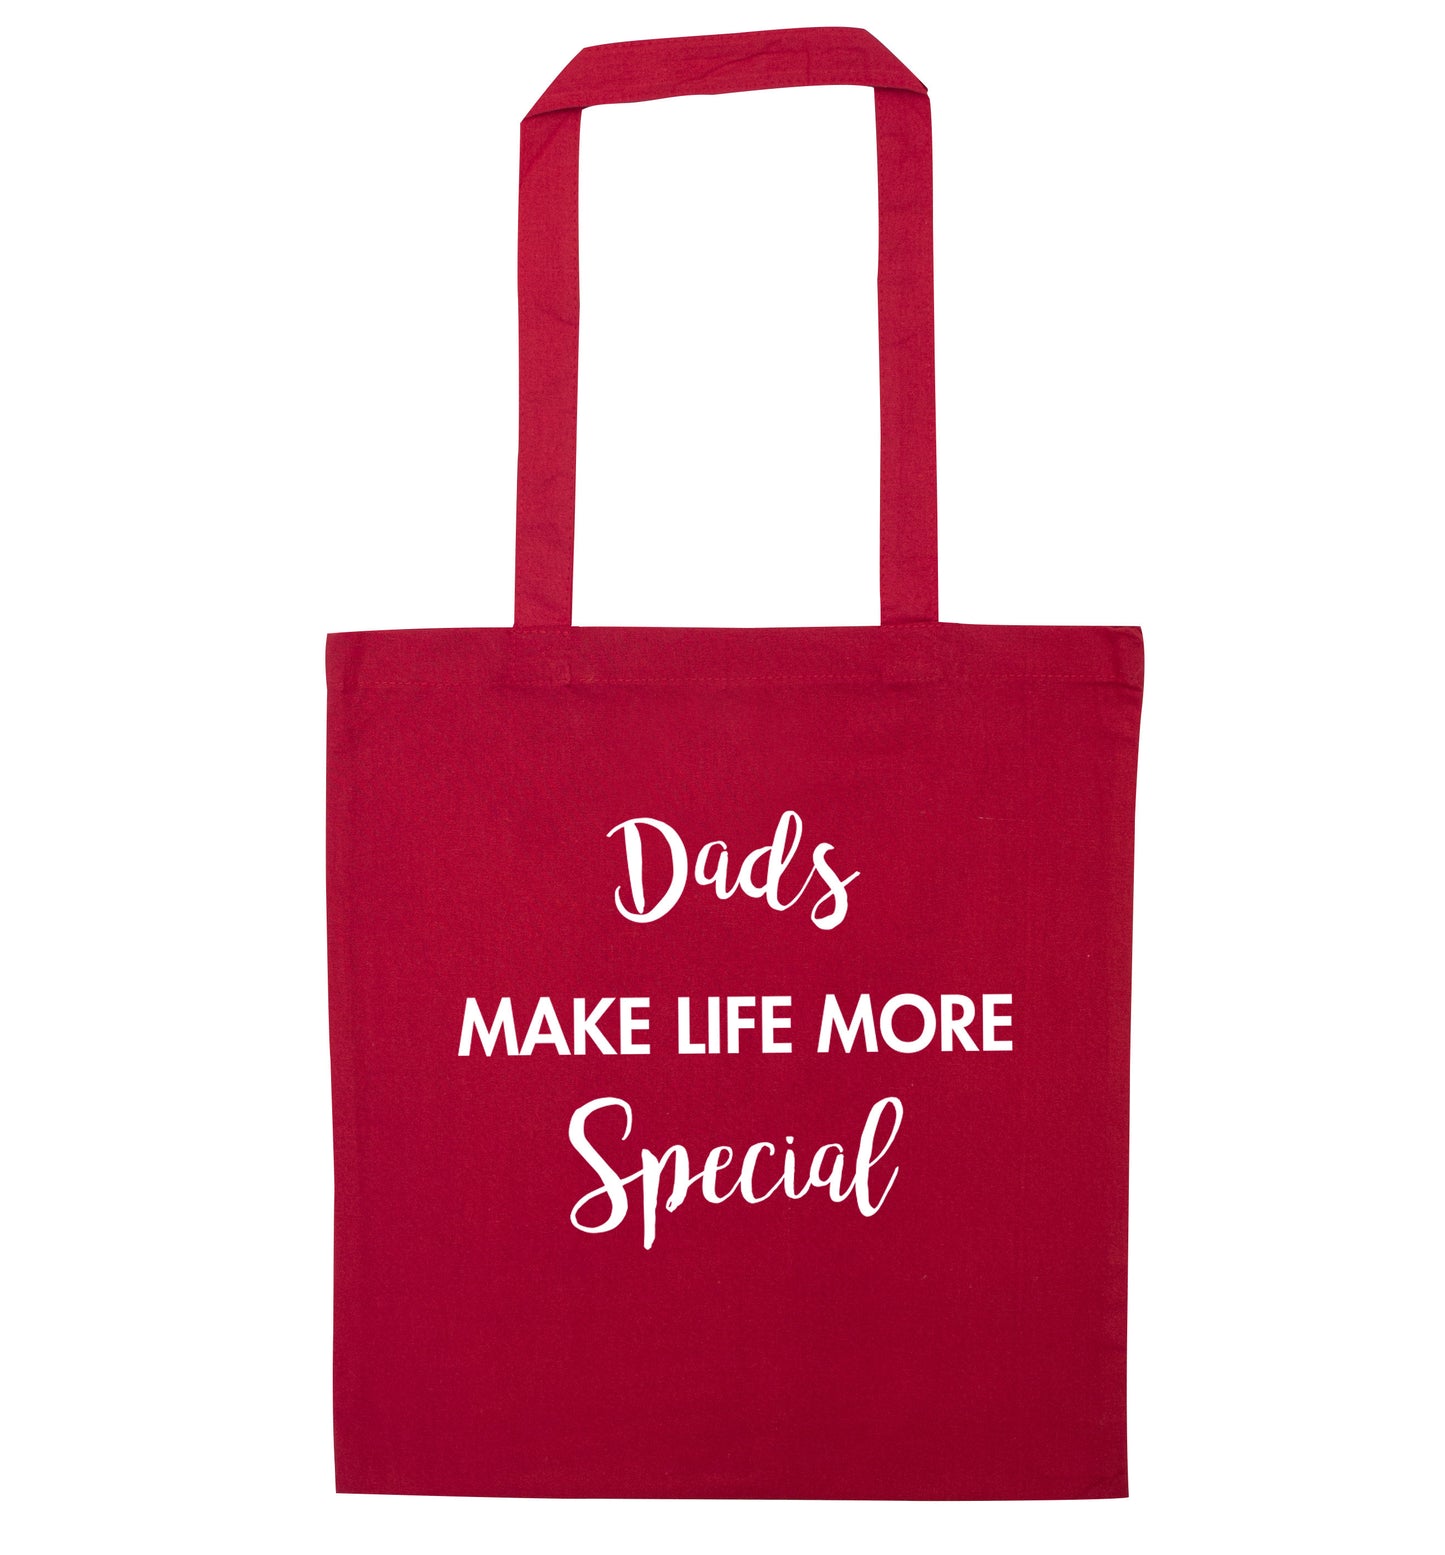 Dads make life more special red tote bag